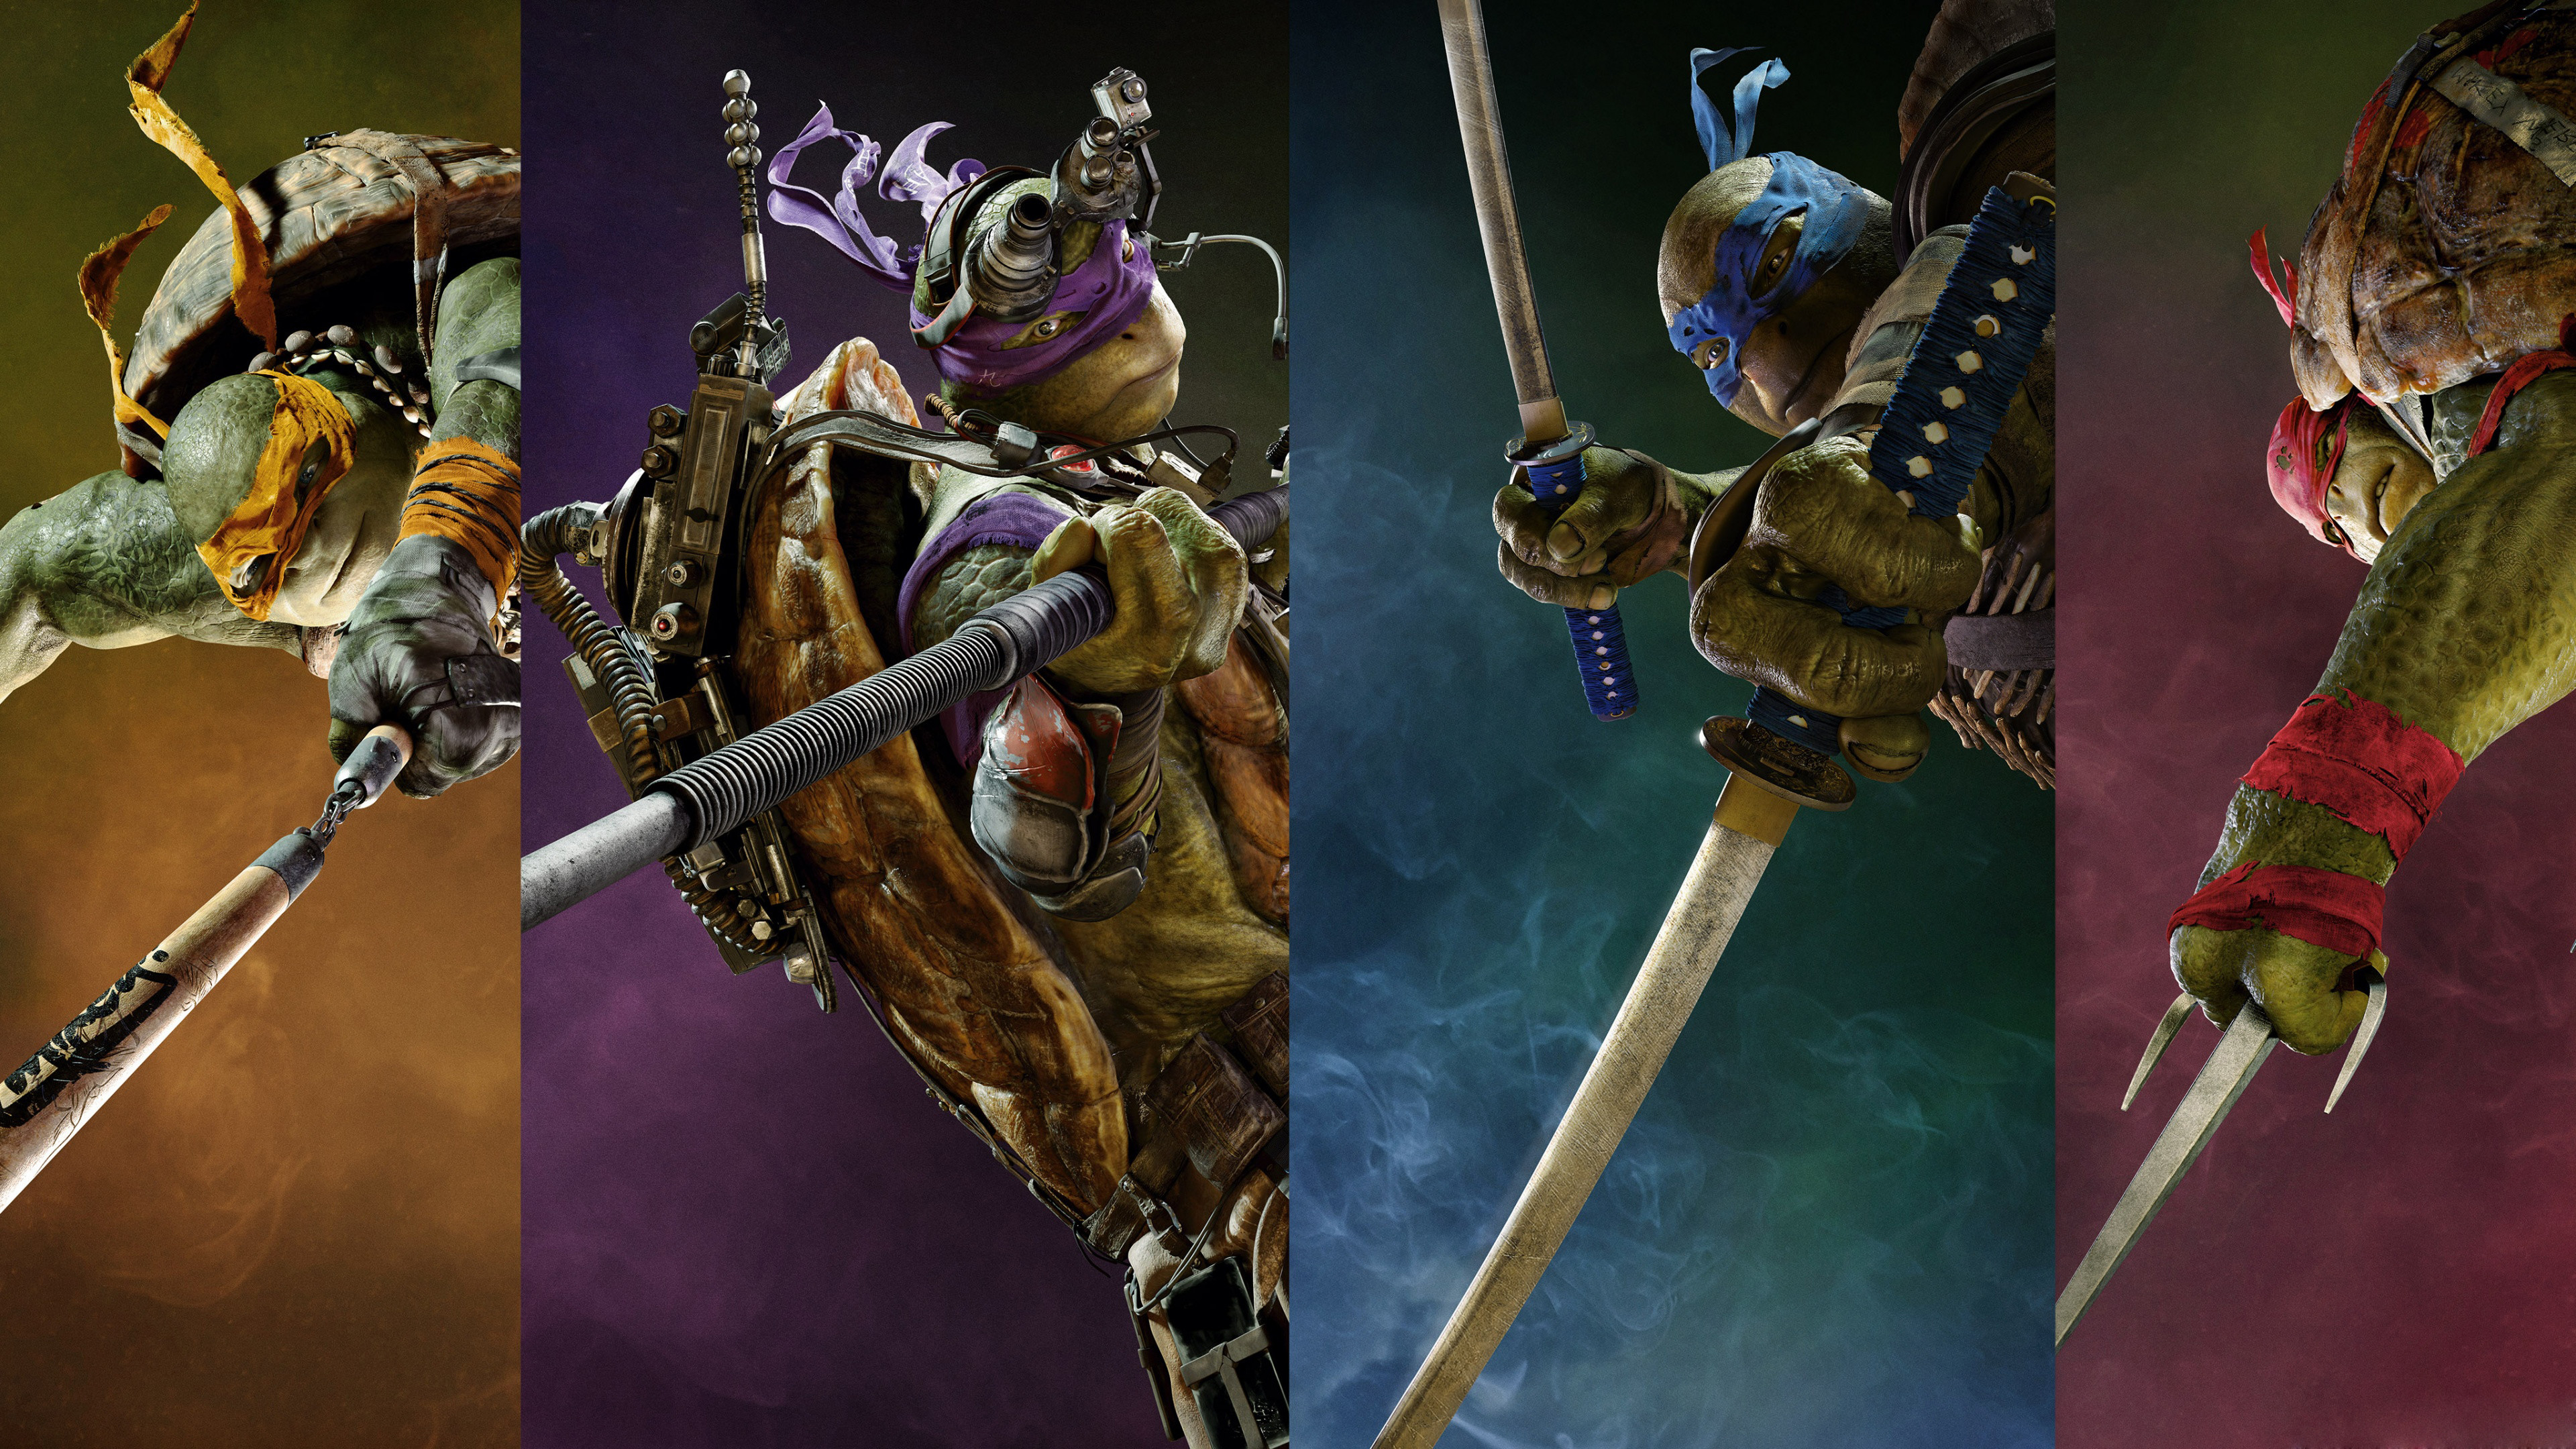 3840x2160 Free Download Tmnt Wallpapers High Resolution.